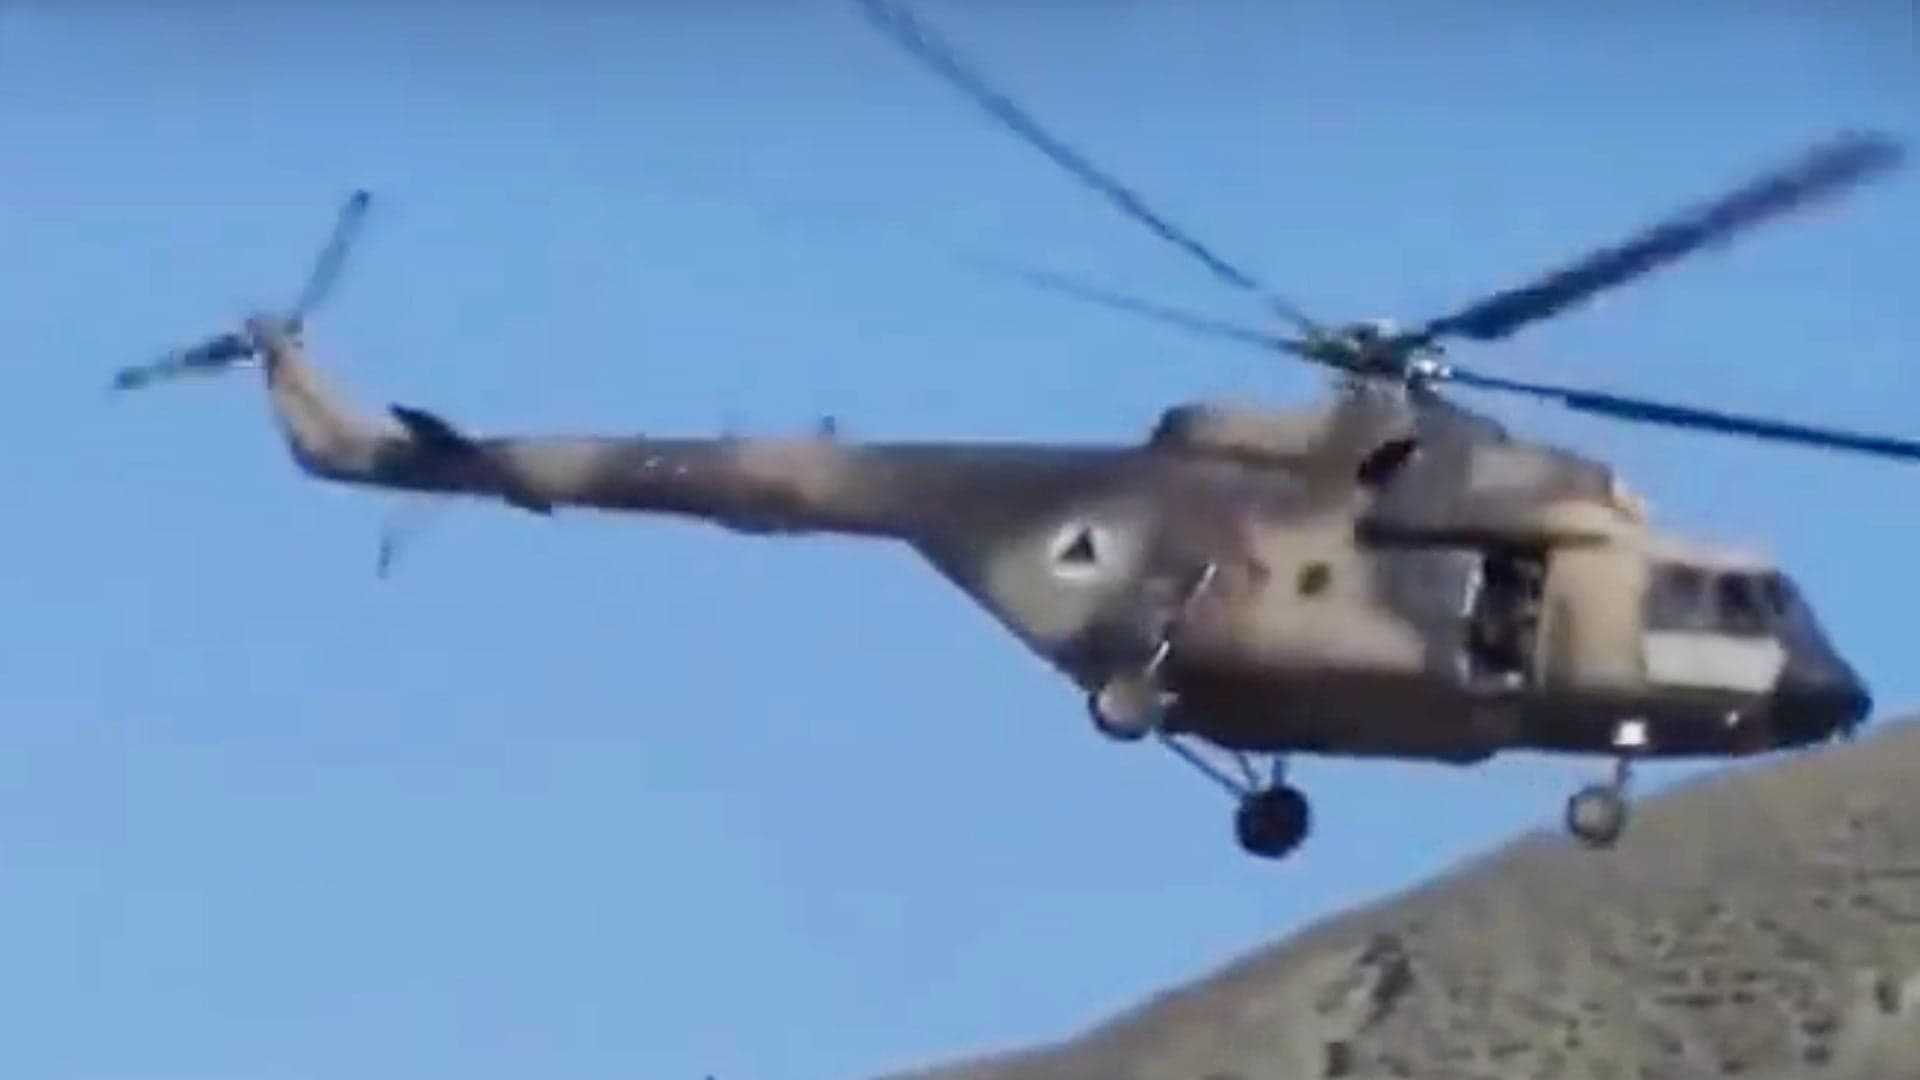 Scary Video Of Helicopter Crash That Killed Top Afghan General Emerges